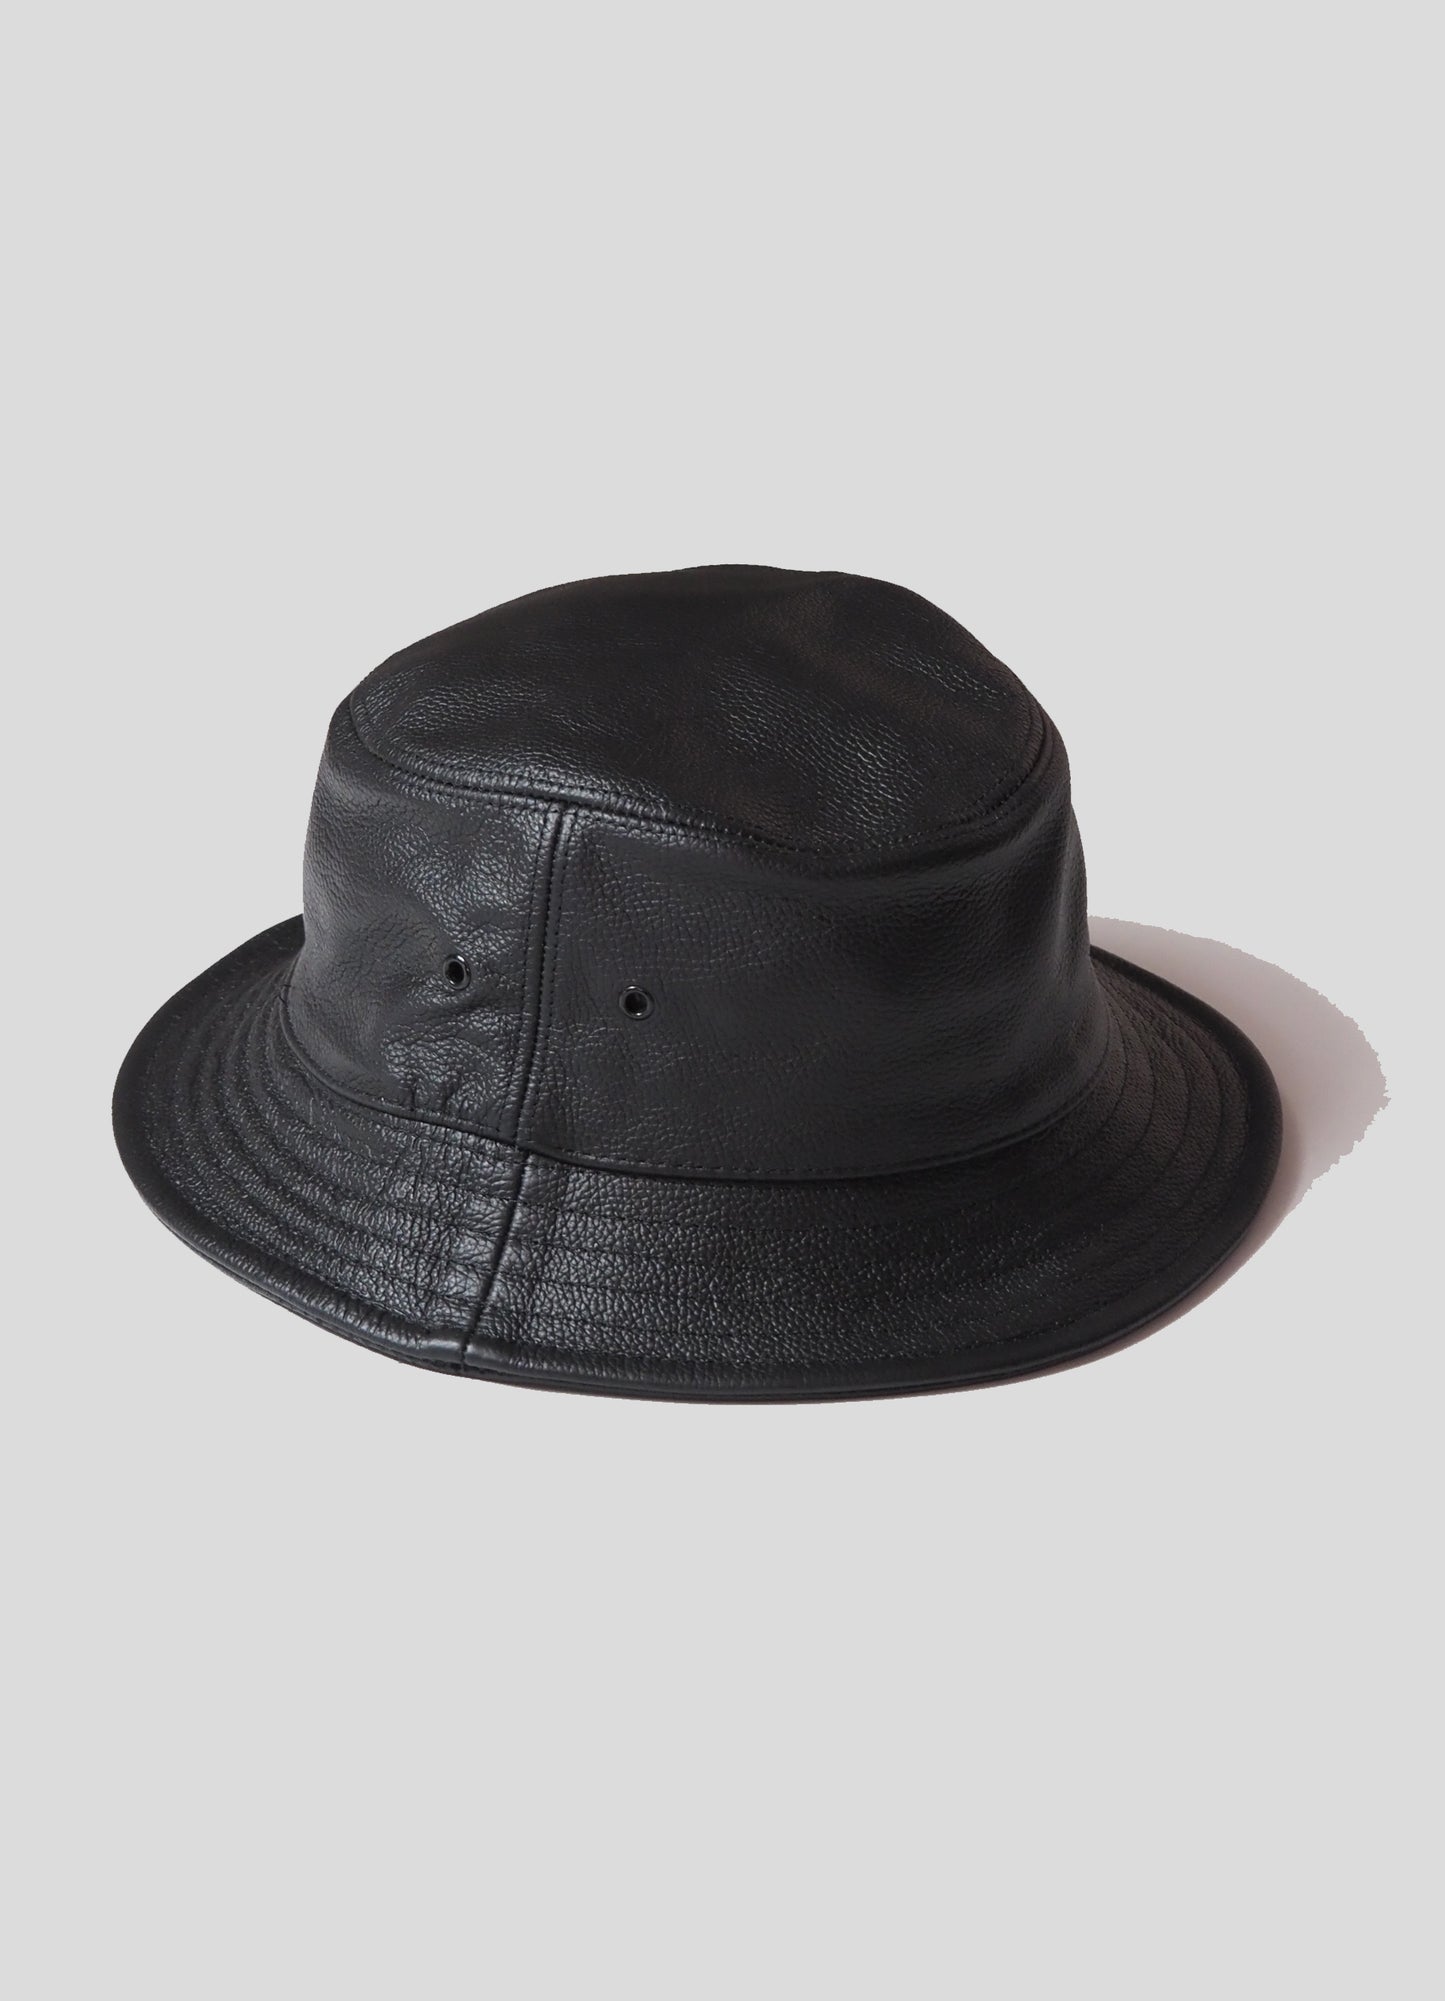 Emstate by Winner Caps(エムステイトバイウィナーキャップ) / Pebble Leather Bucket Hat [#BUG-LT]-Lism Select